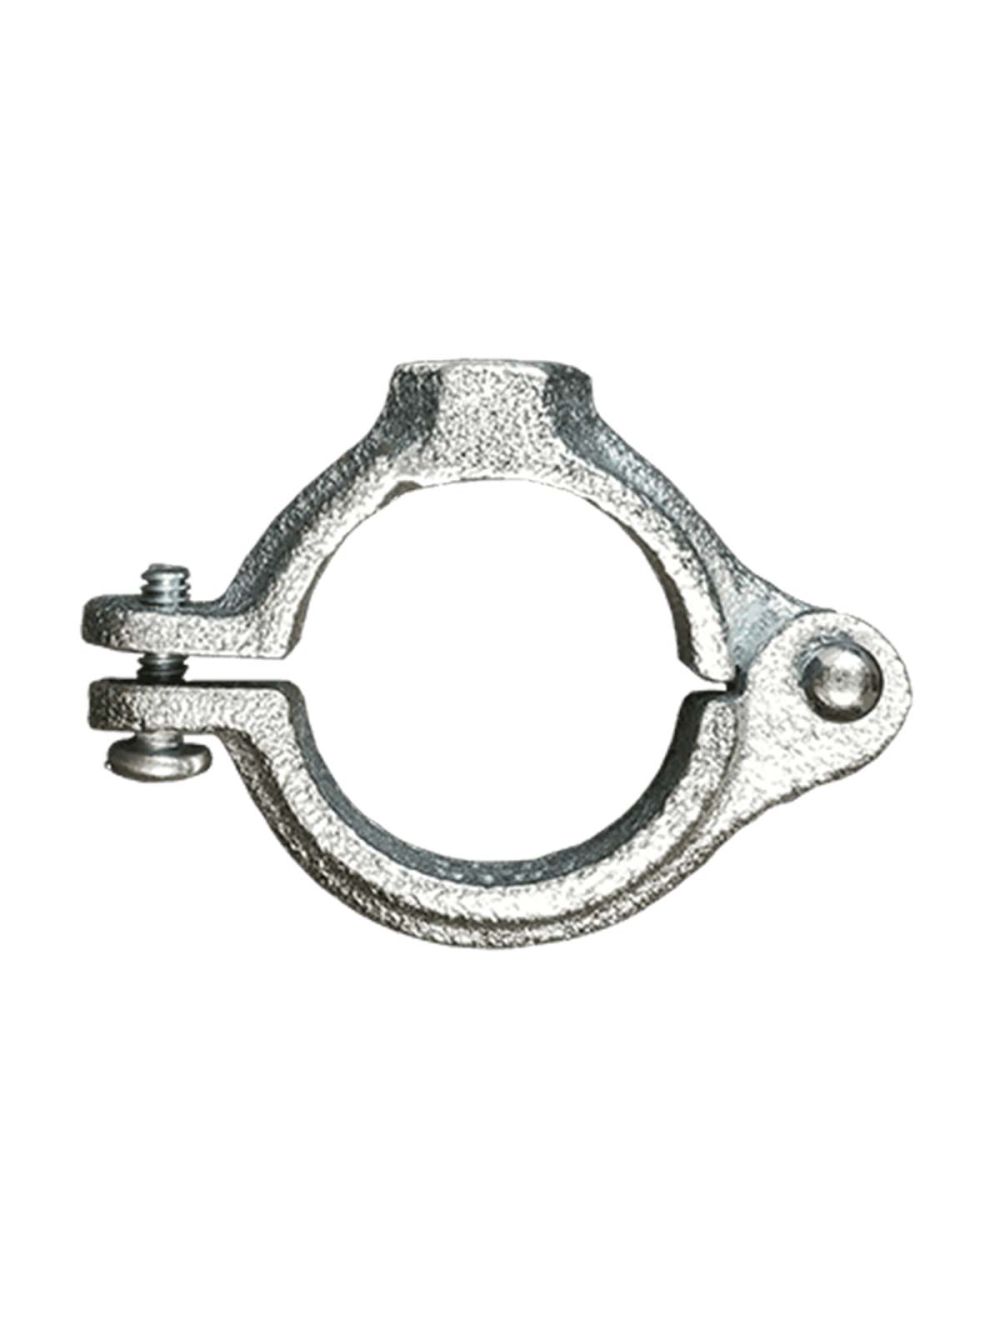 5 Cast Iron Ring with a Clamp